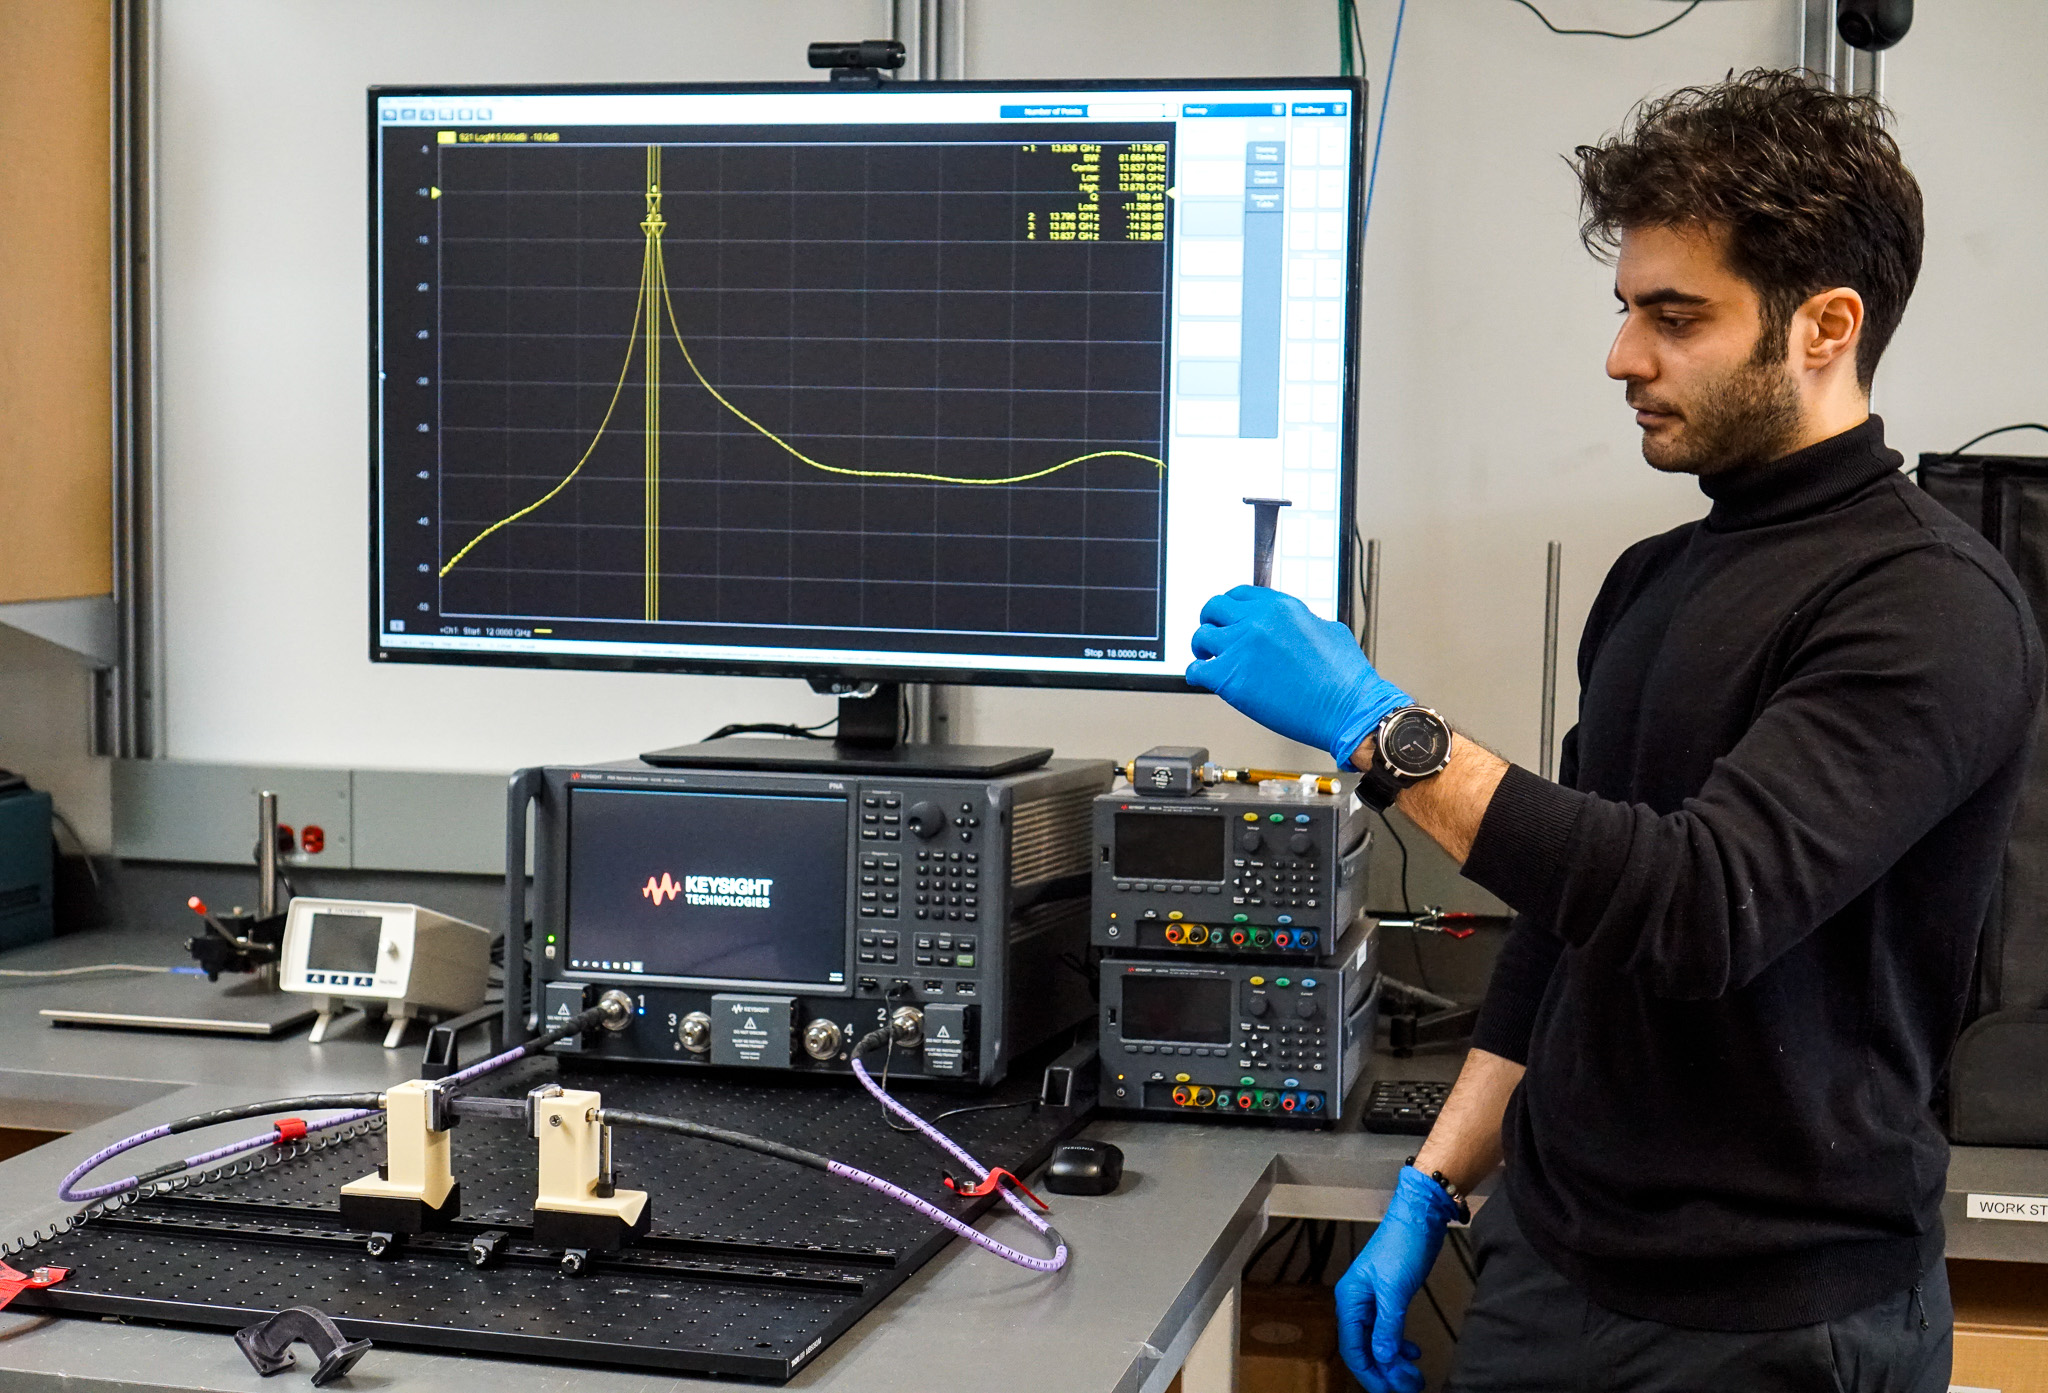 Researcher in lab holds component in front of screen